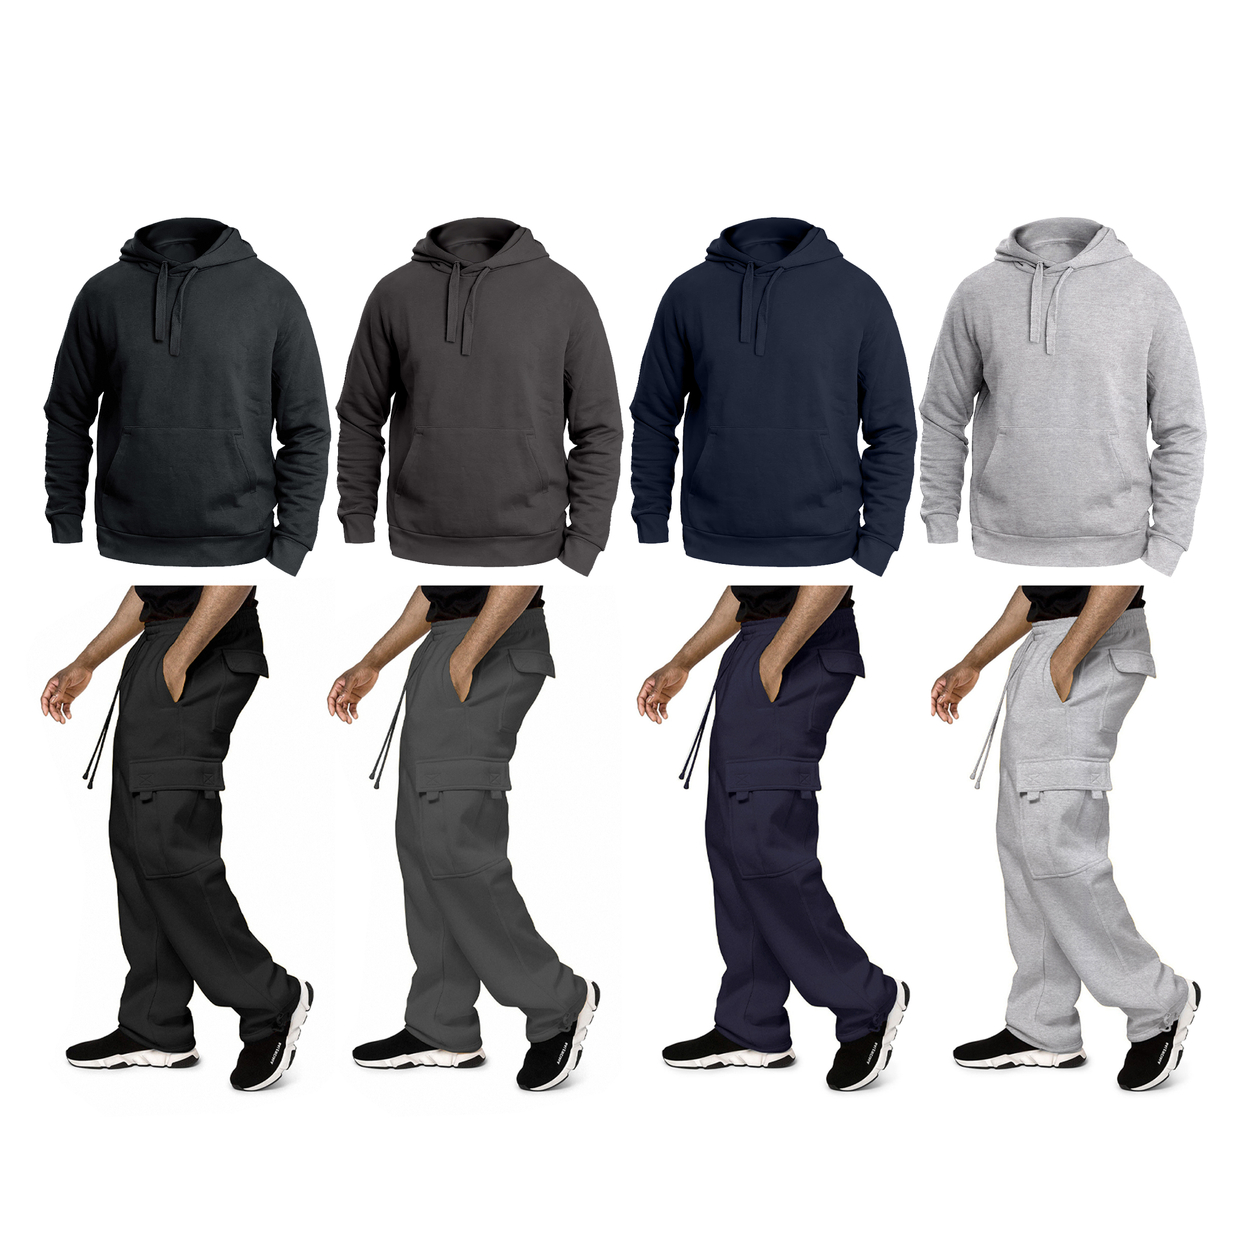 Multi-Pack: Big & Tall Men's Winter Warm Cozy Athletic Fleece Lined Multi-Pocket Cargo Sweatsuit - Charcoal, 1-pack, Small